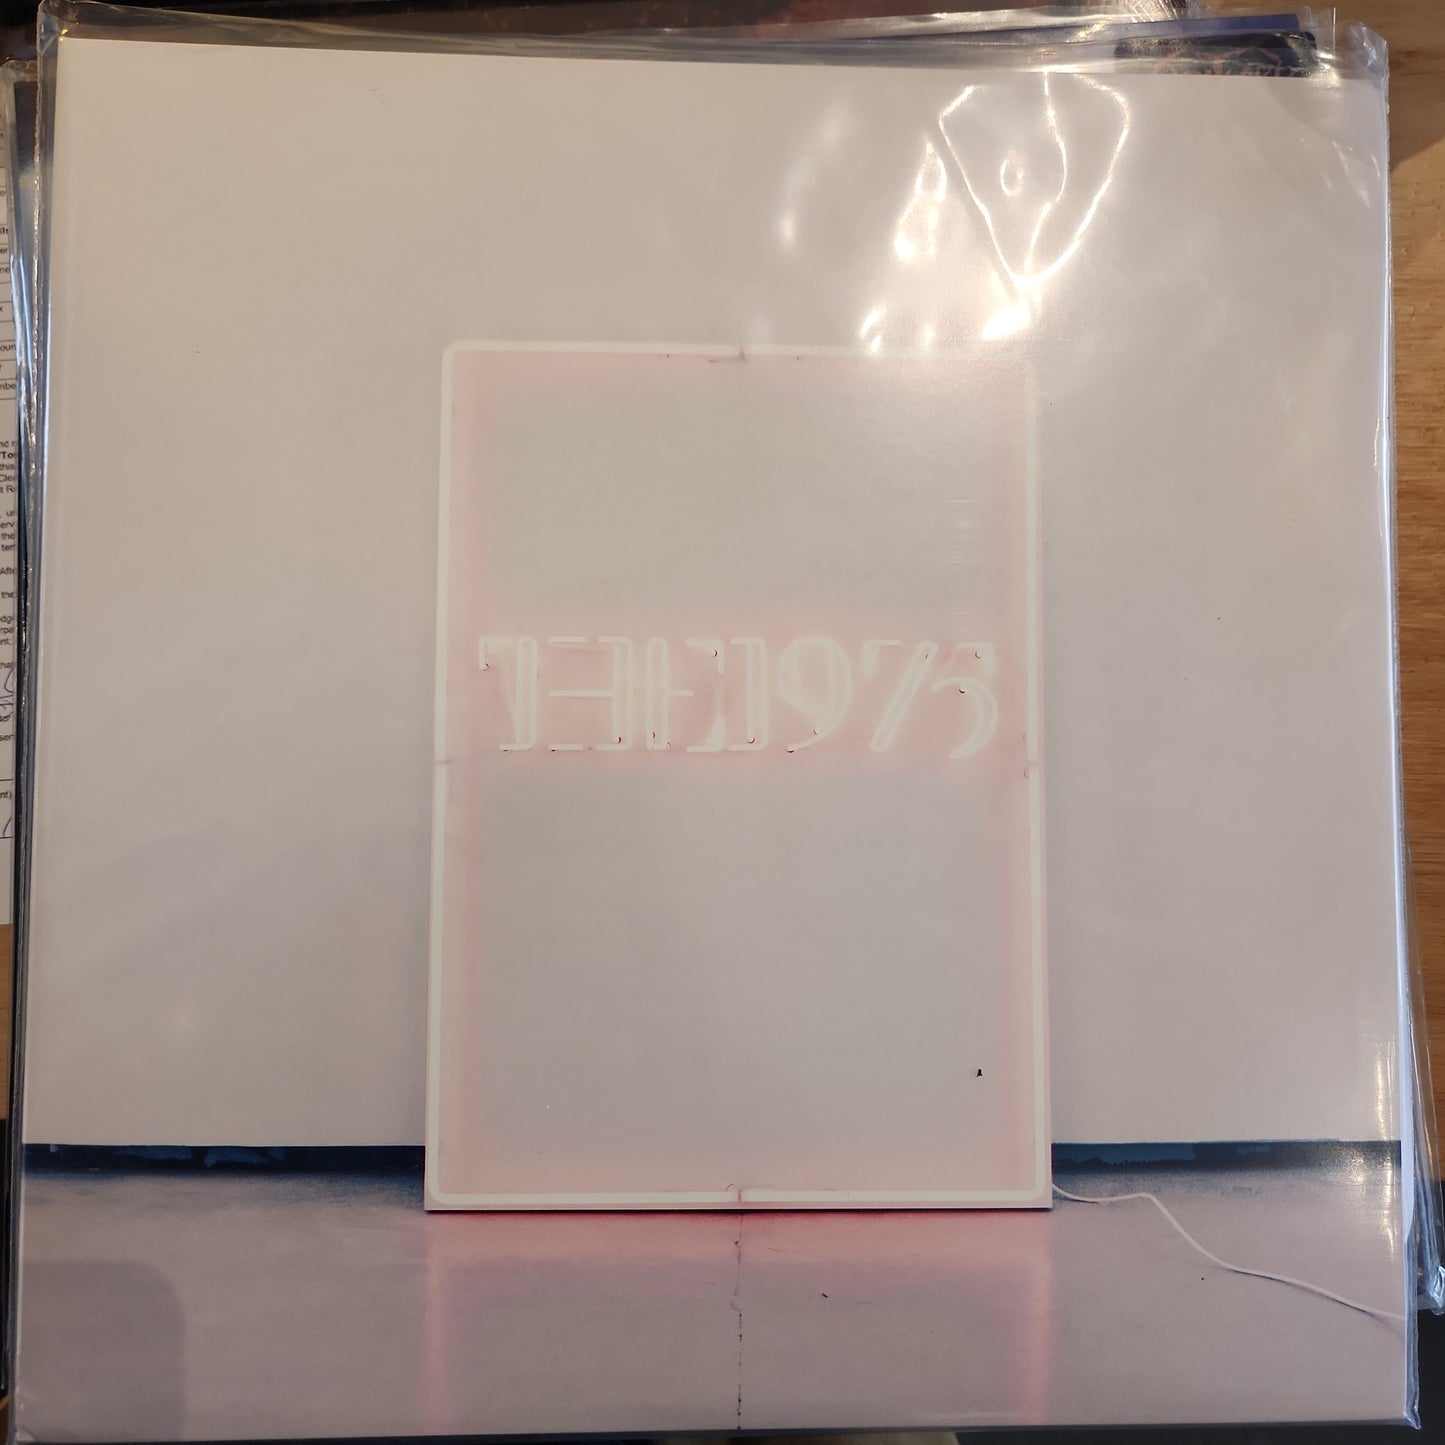 The 1975 - I like it when you sleep, for you are so beautiful yet unaware of it - Colour Vinyl LP